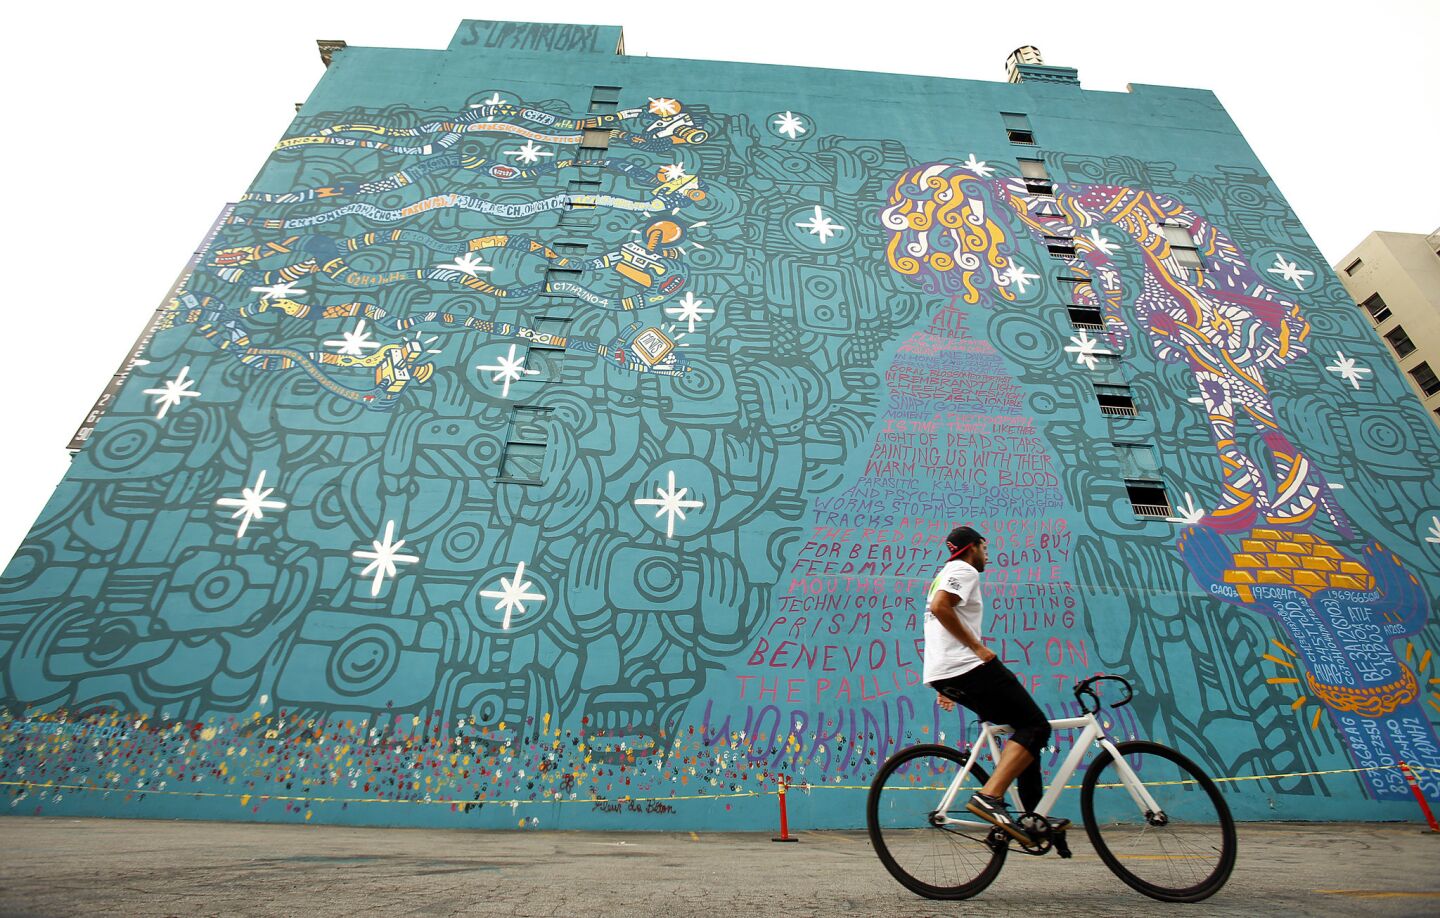 Arts and culture in pictures by The Times | Foster the People mural